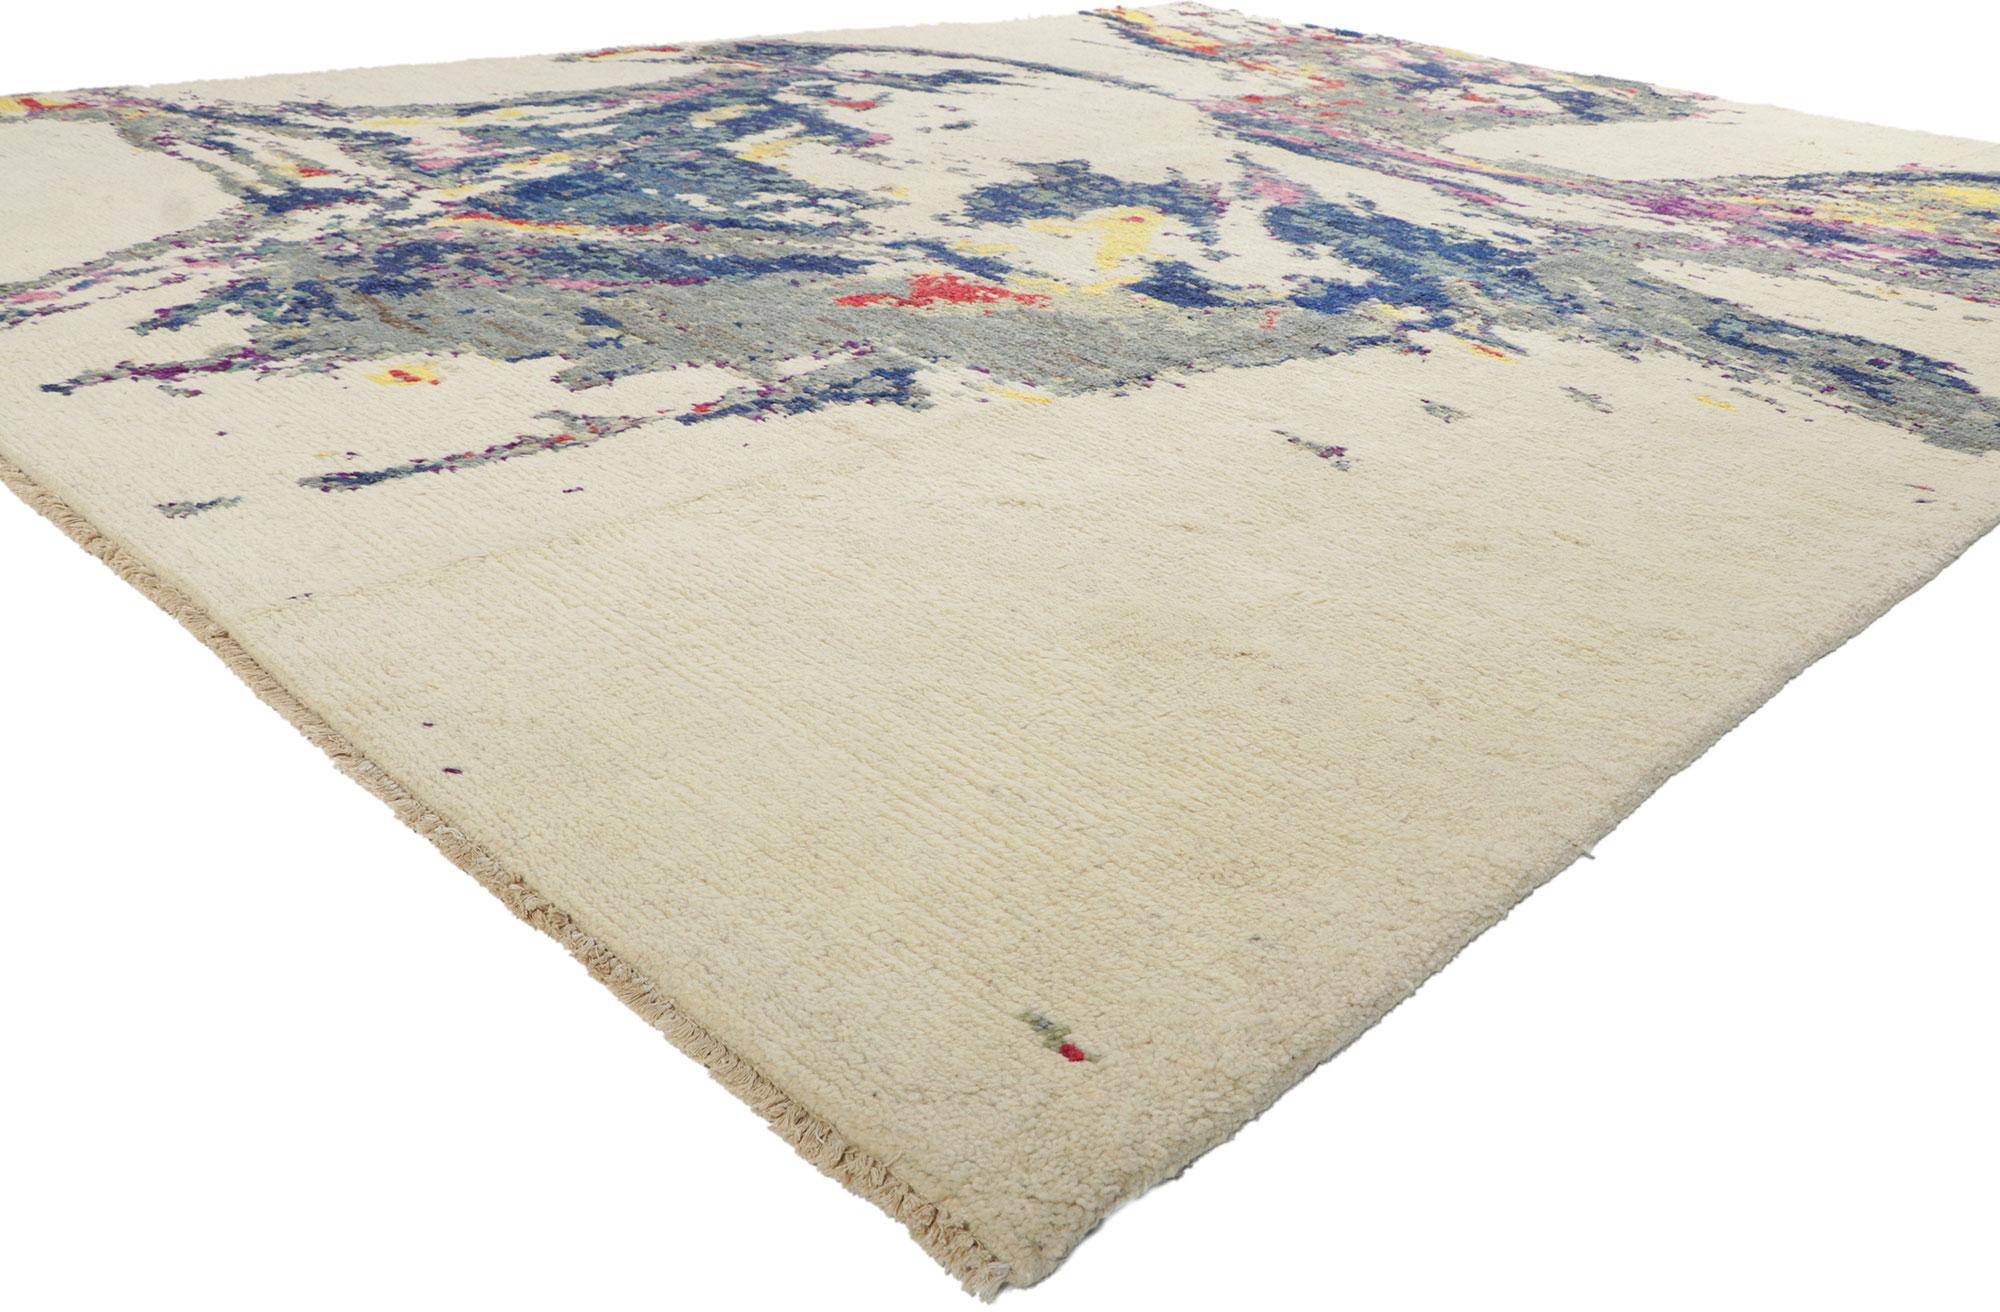 80336 New Moroccan Area Rug with Abstract Eagle Ornithology Design, 10'06 x 13'03. Showcasing Abstract Expressionist style with incredible detail and texture, this hand knotted wool Moroccan style rug is a captivating vision of woven beauty. The